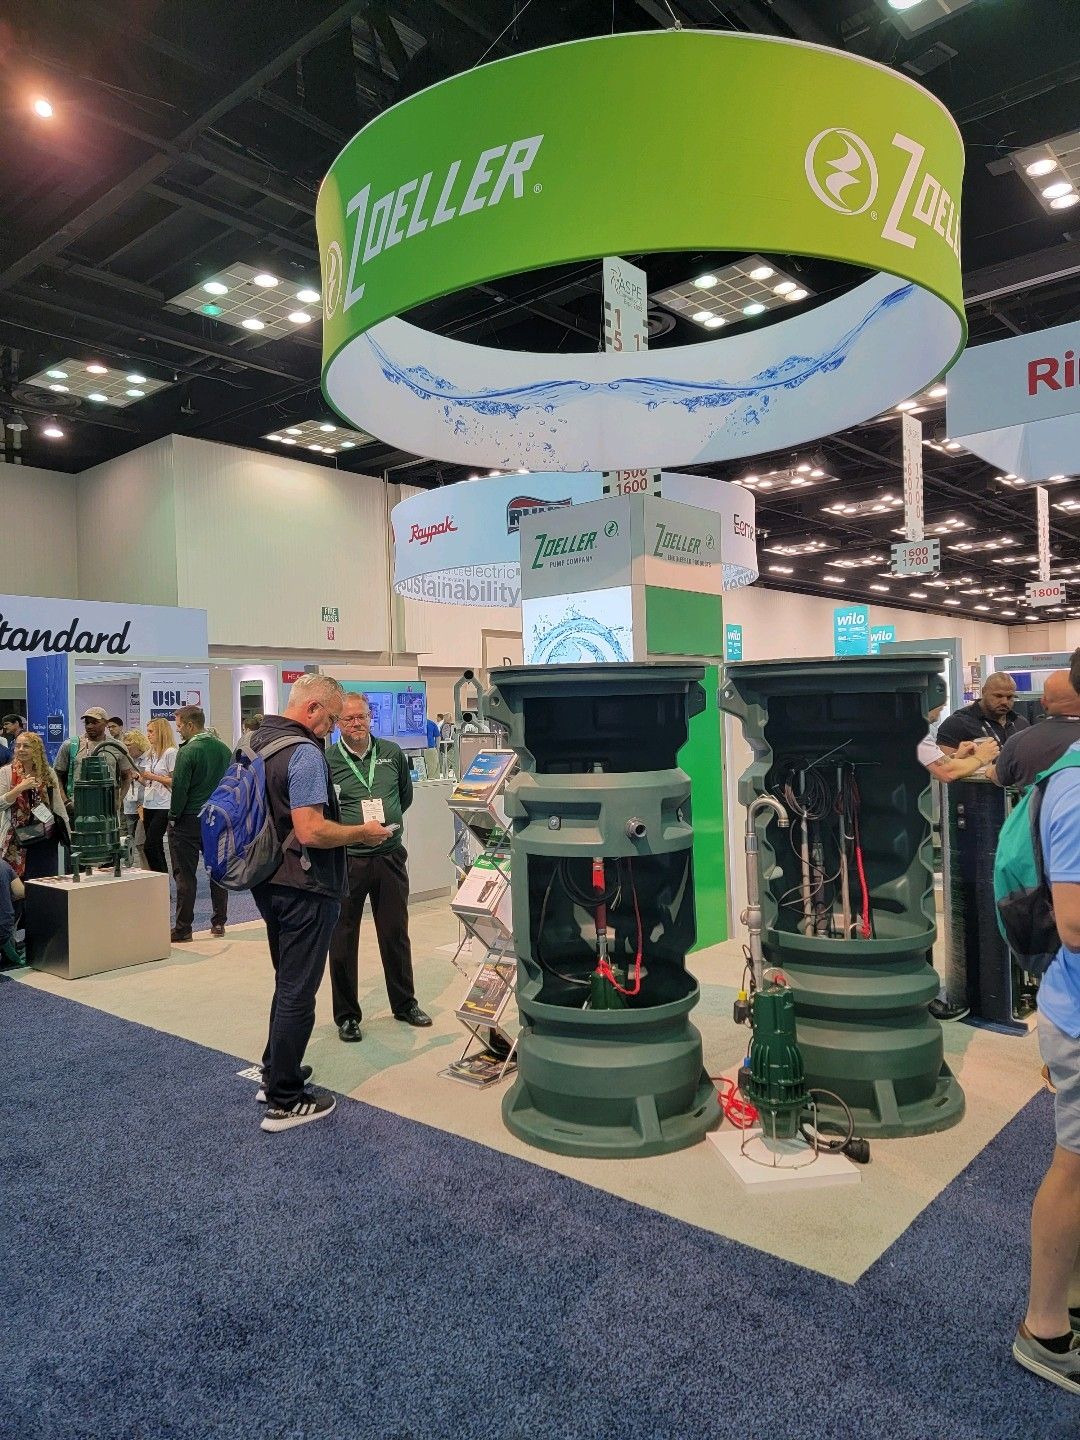 Zoeller Company on LinkedIn: Stop by and see us in the Zoeller booth at ...